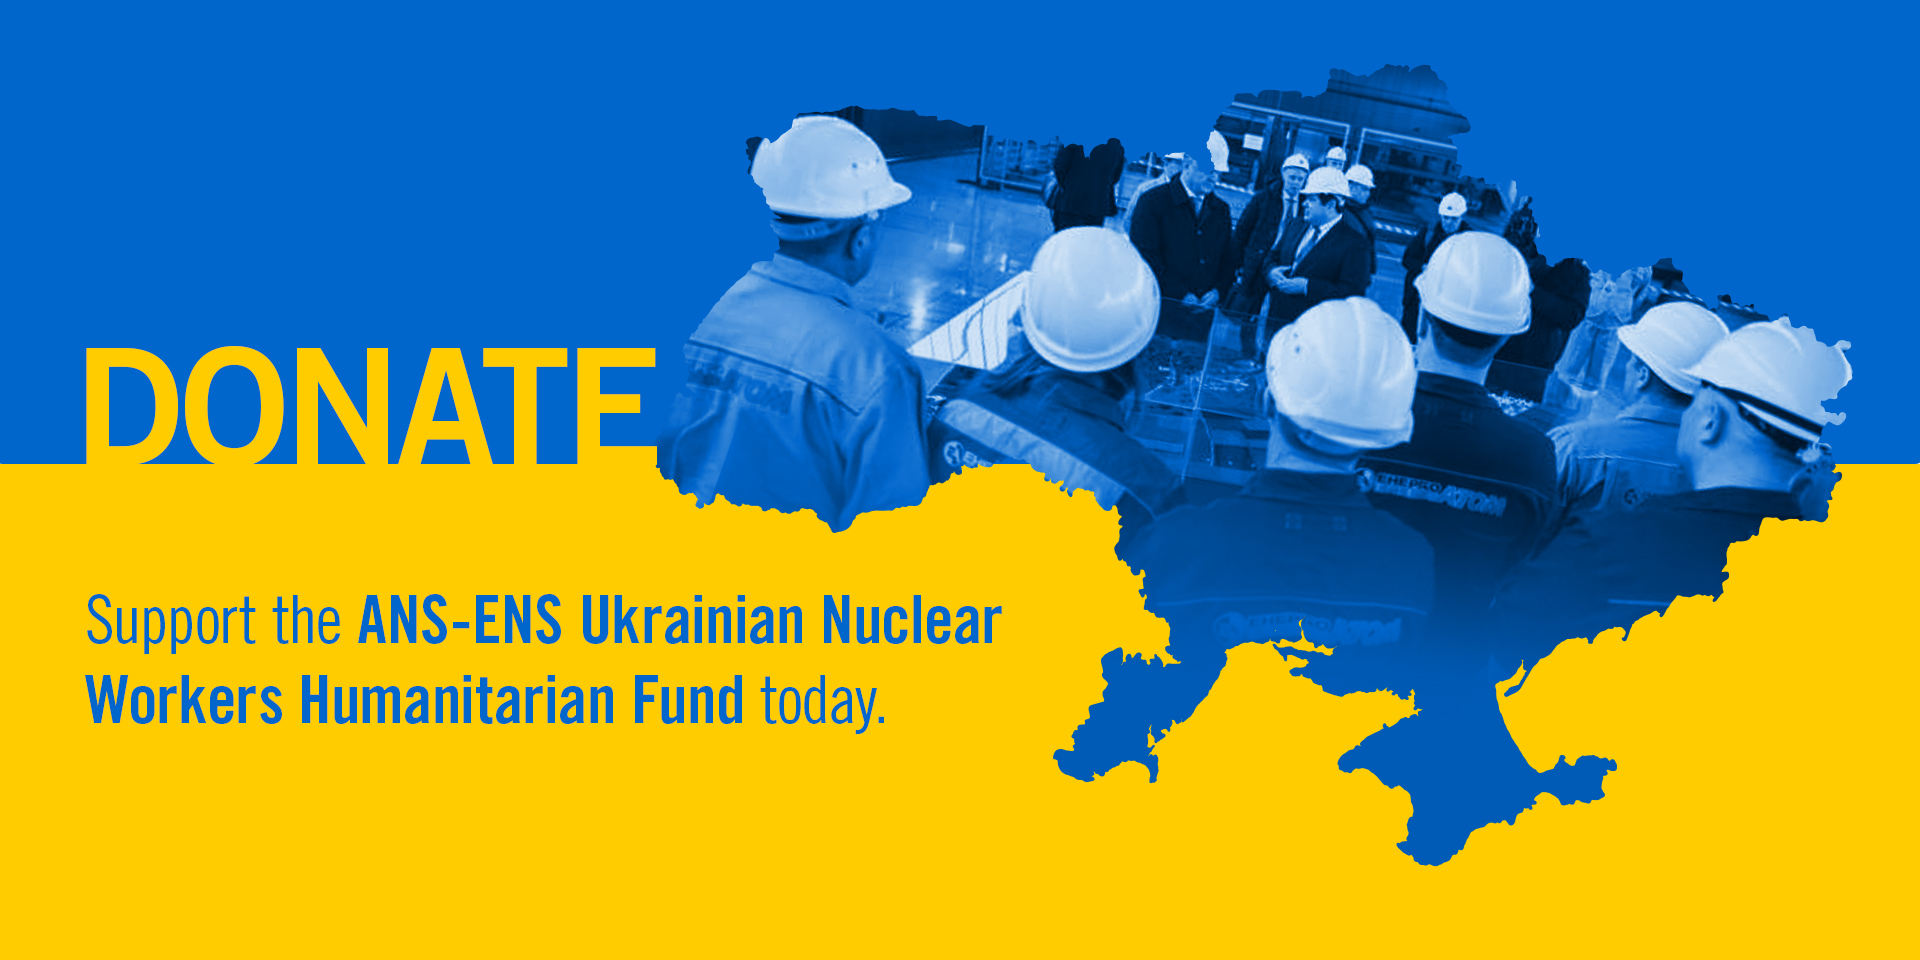 All donations go directly to the Ukrainian Nuclear Society